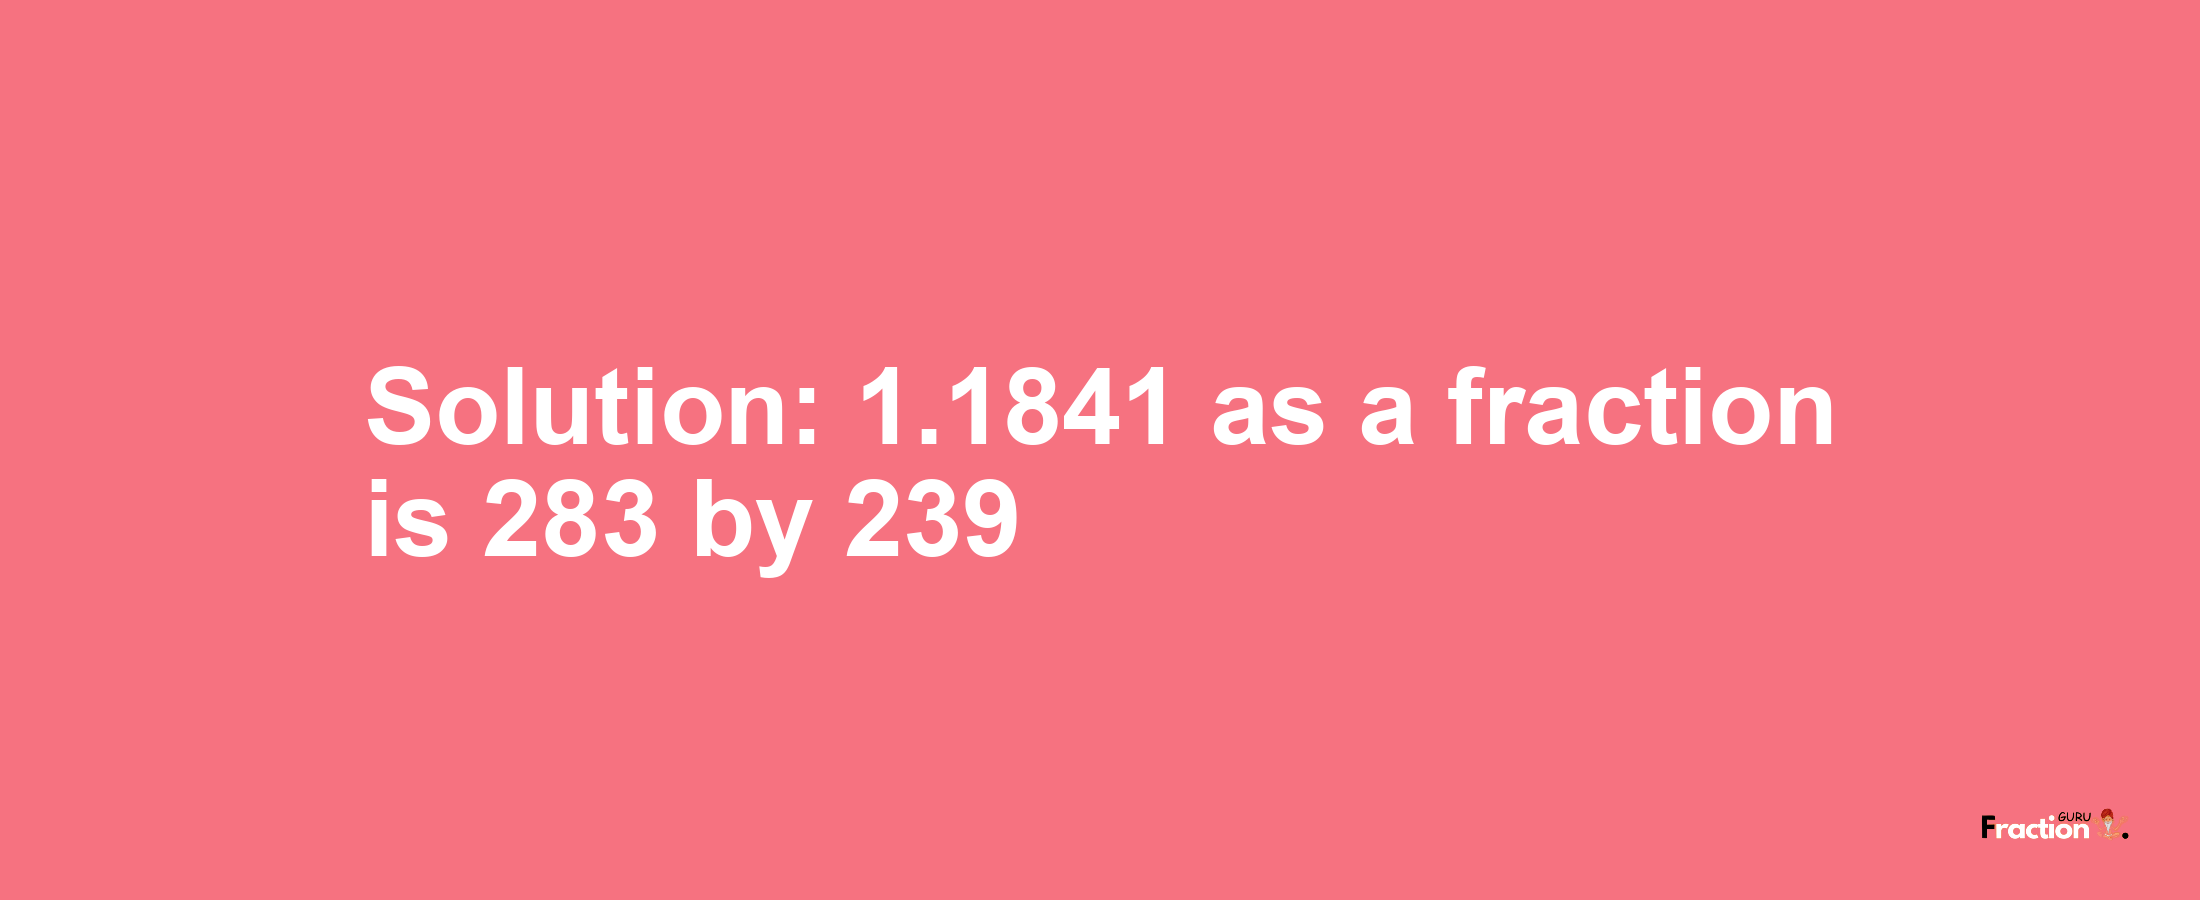 Solution:1.1841 as a fraction is 283/239